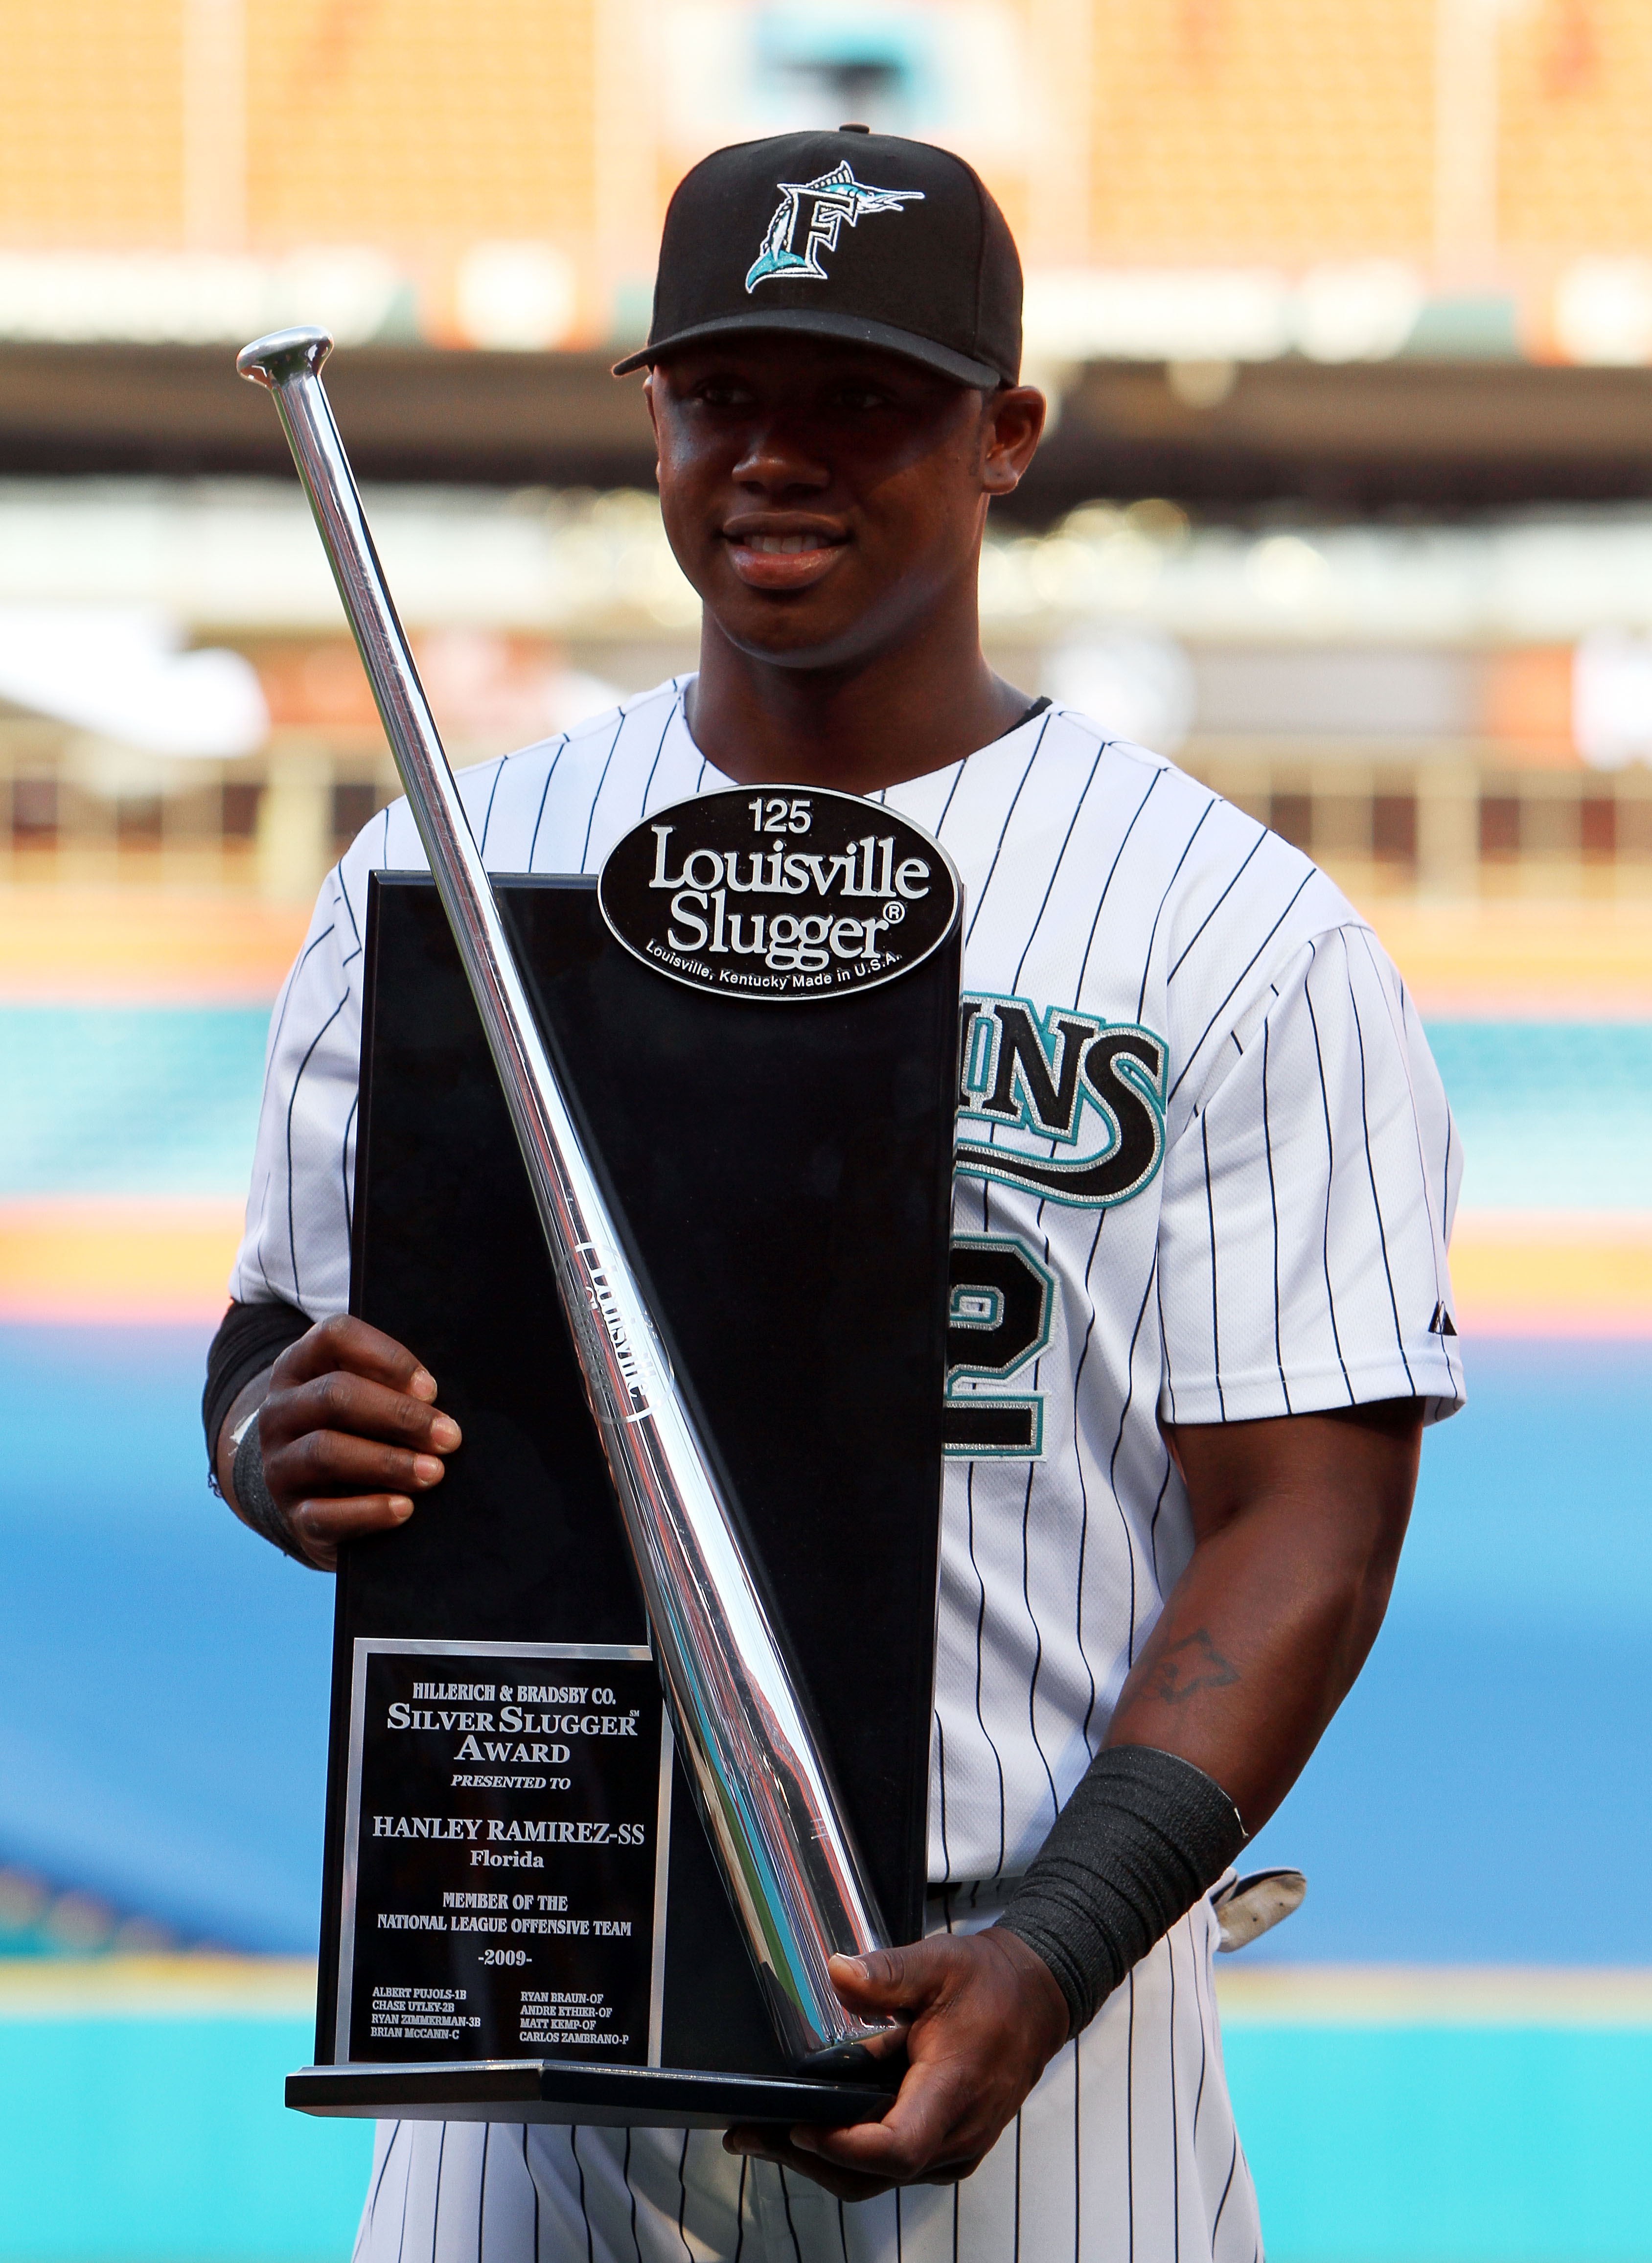 MIAMI - APRIL 09:  Hanley Ramirez #2 of the Florida Marlins accepts his 2009 Louisville Slugger Silver Slugger Award before taking on the Los Angeles Dodgers during the Marlins home opening game at Sun Life Stadium on April 9, 2010 in Miami, Florida.  (Ph